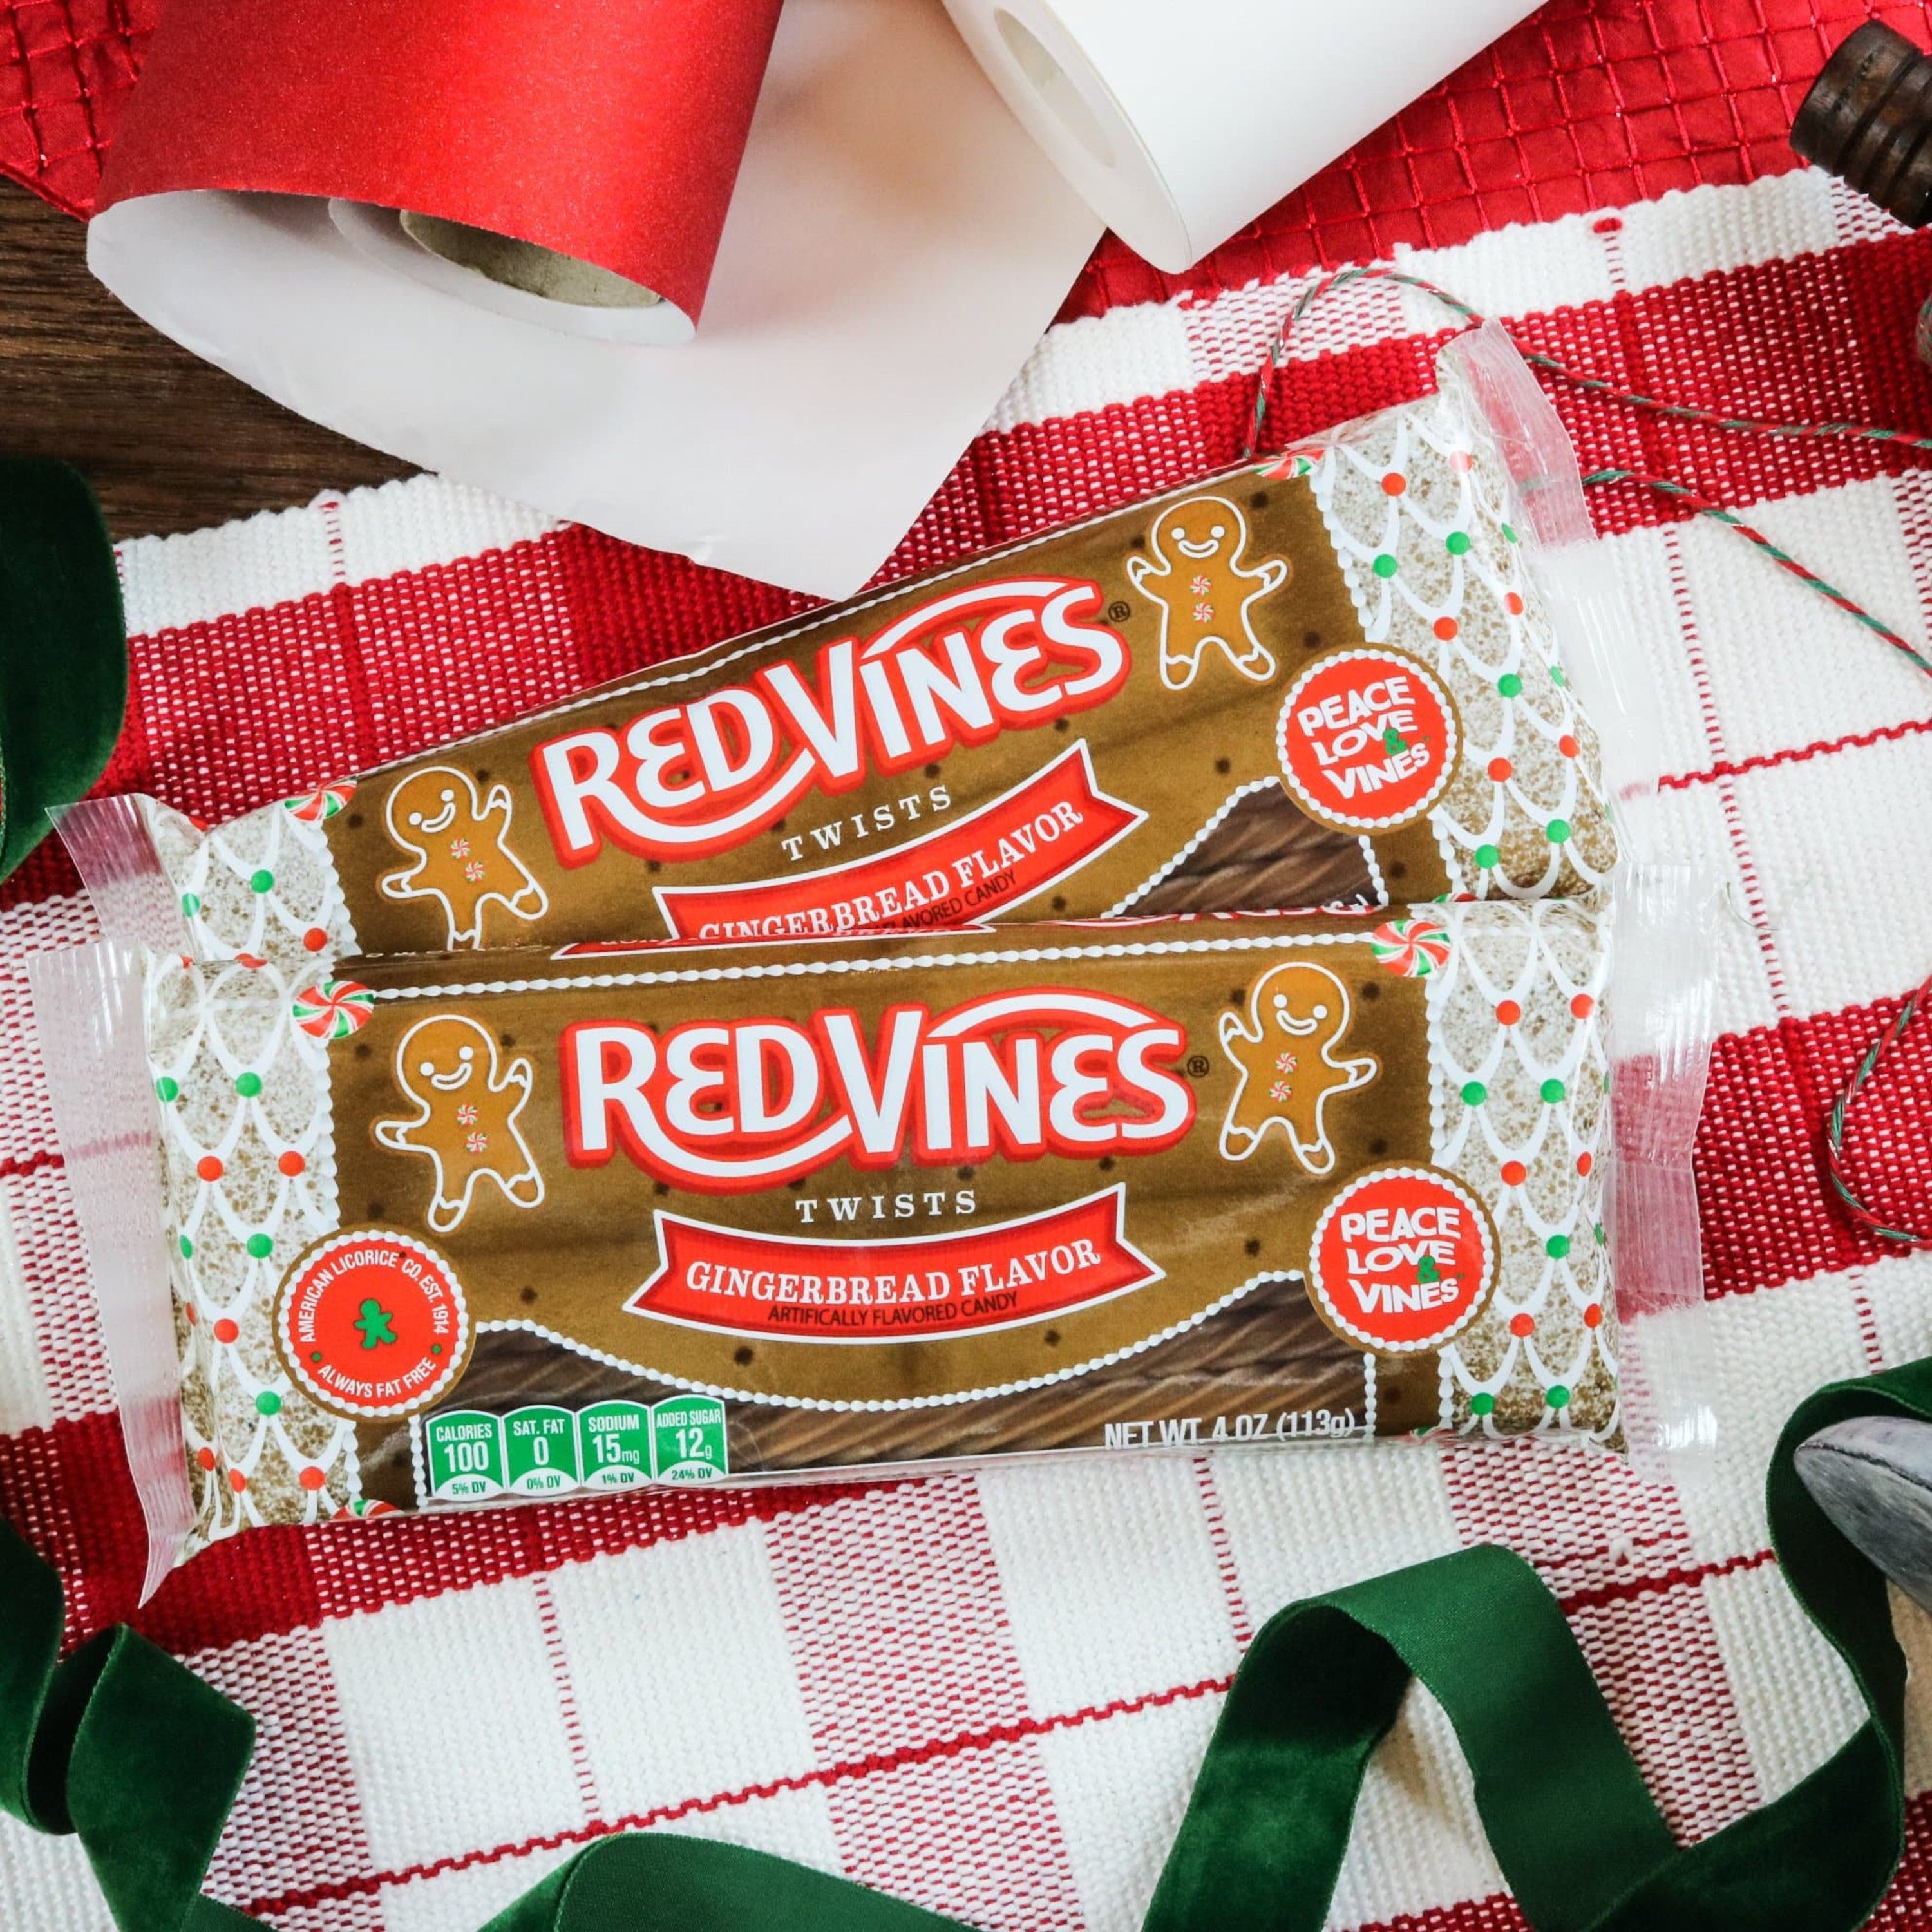 RED VINES Gingerbread flavored licorice twists trays on festive wrapping paper